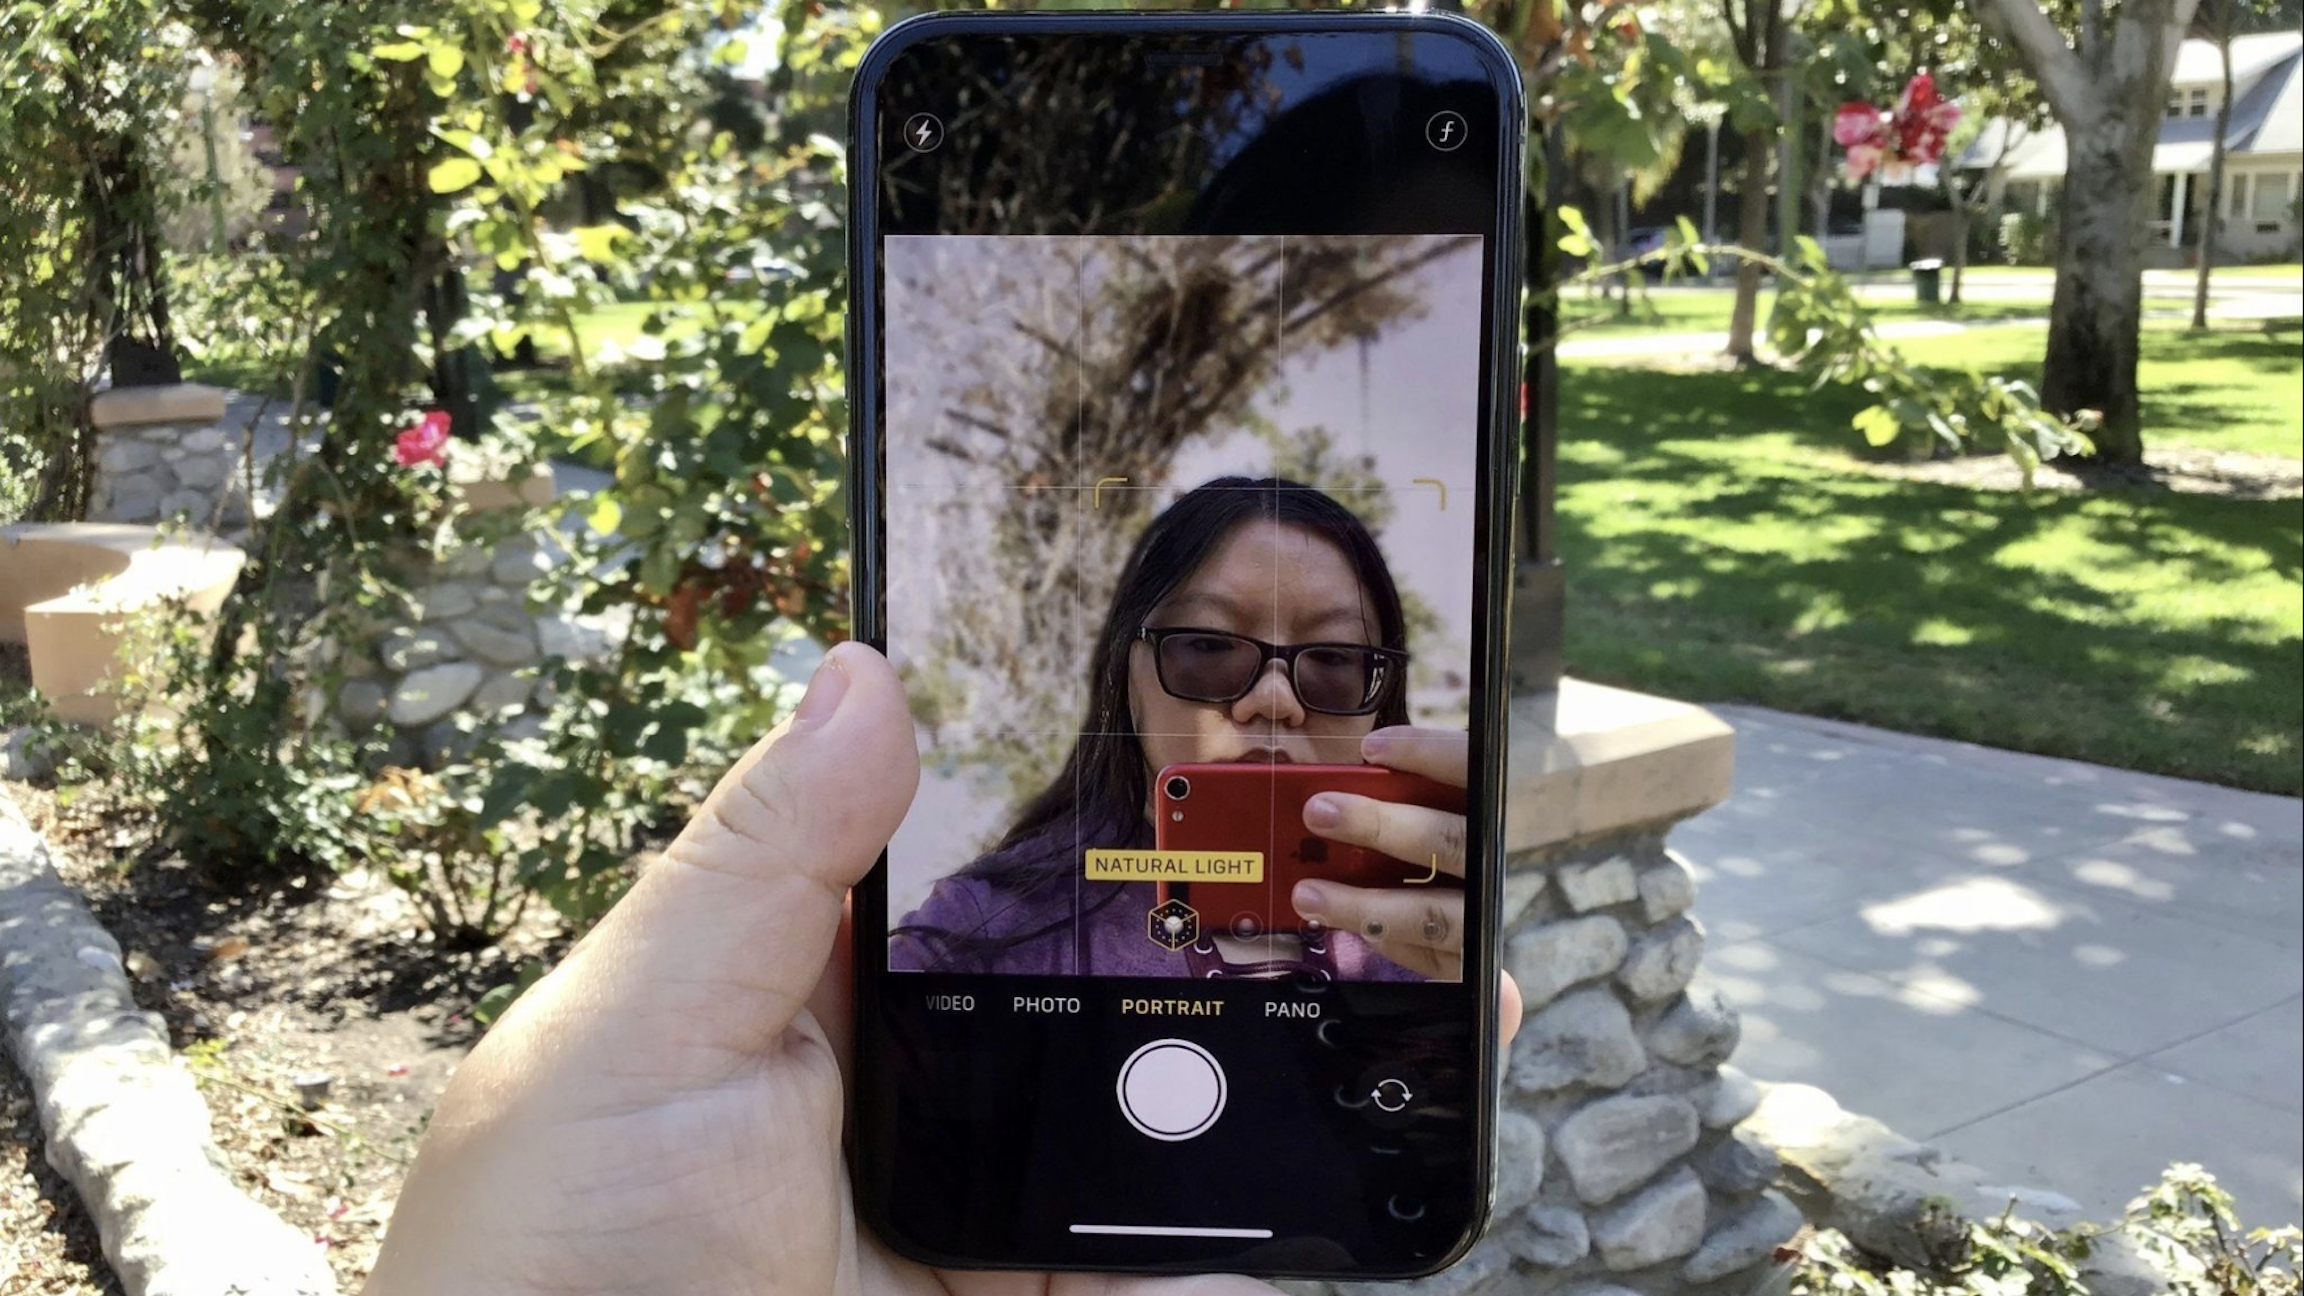 Christine takes a portrait selfie with iPhone 11Pro